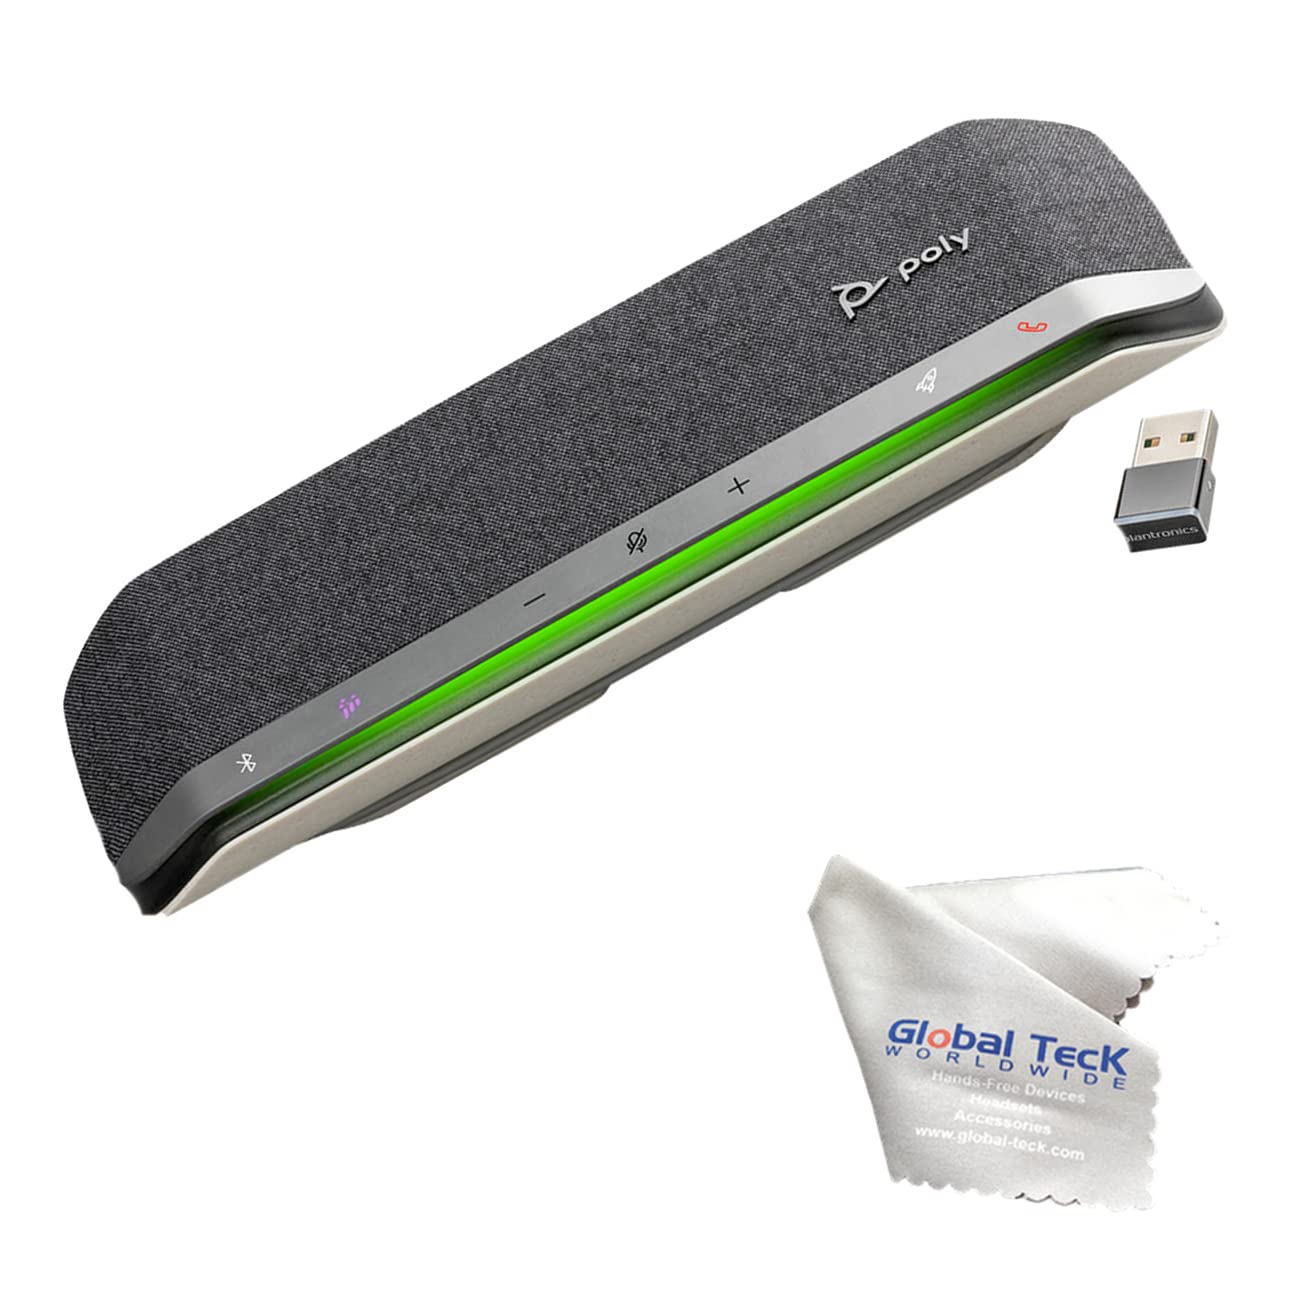 GTW Bundle with Poly Sync 40+ Teams USB-A/C Speakerphone, Bluetooth dongle, Microfiber Cloth, for Streaming Voice/Video, Distance Learning, Remote ...